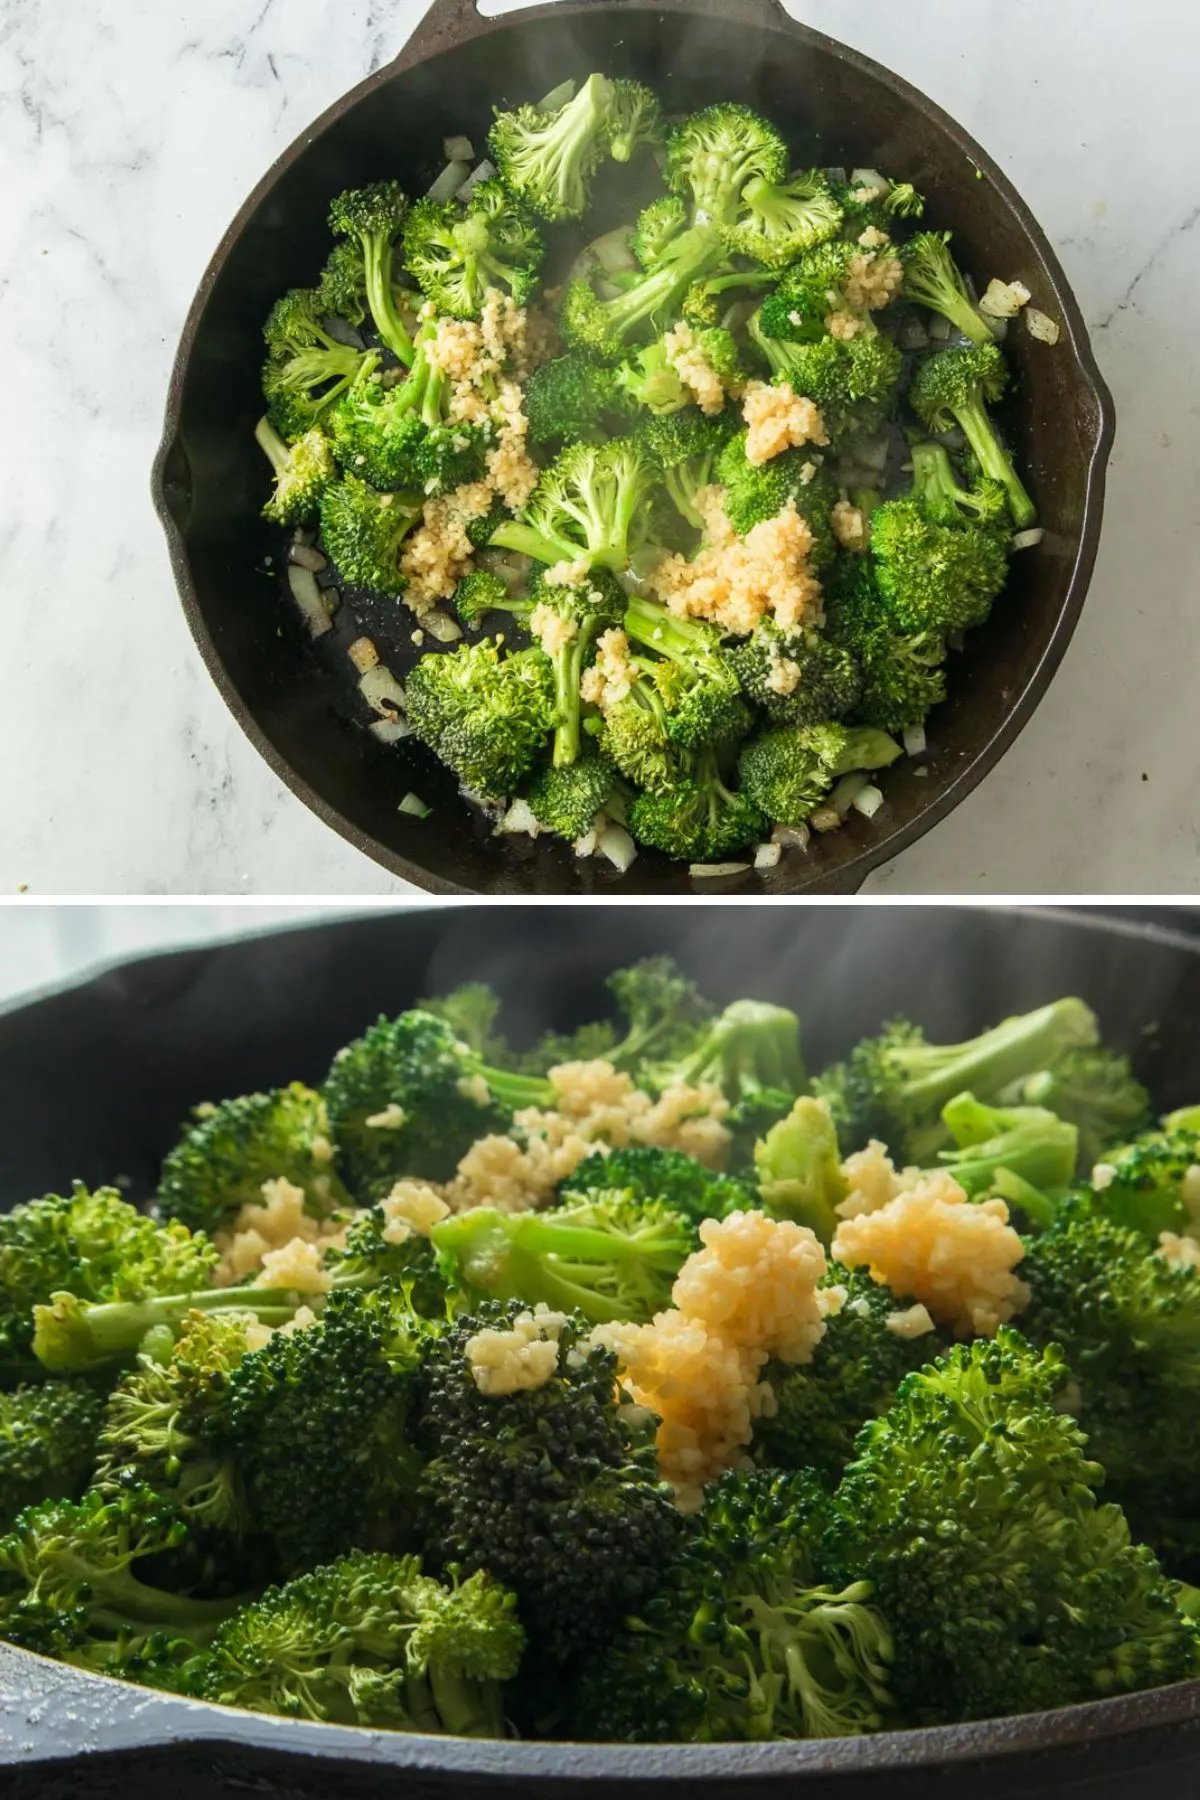 Adding broccoli florets and minced garlic to the skillet